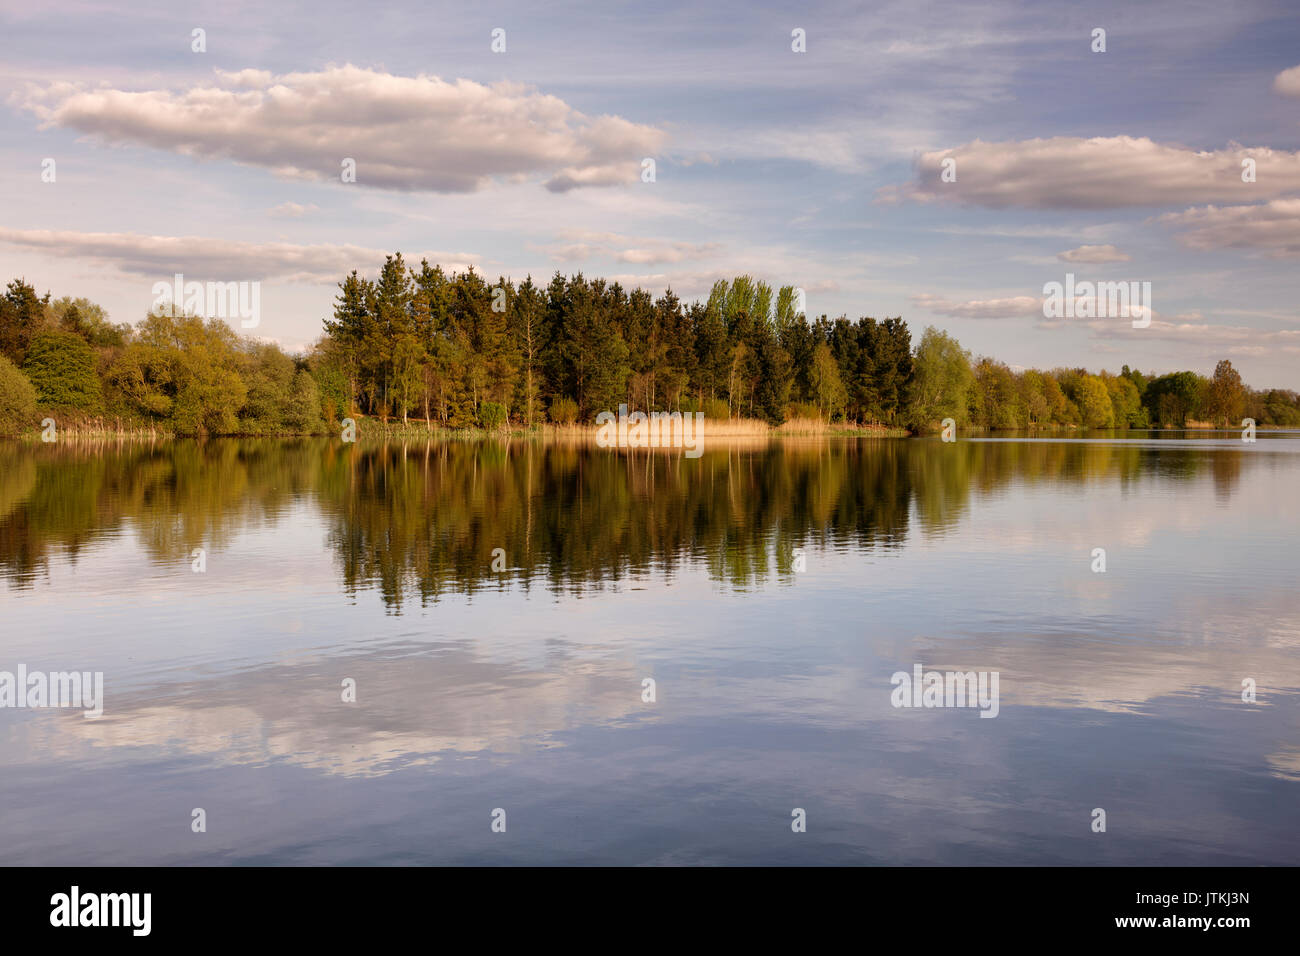 Reflection of trees, forest and couds in a still and calm lake Stock Photo